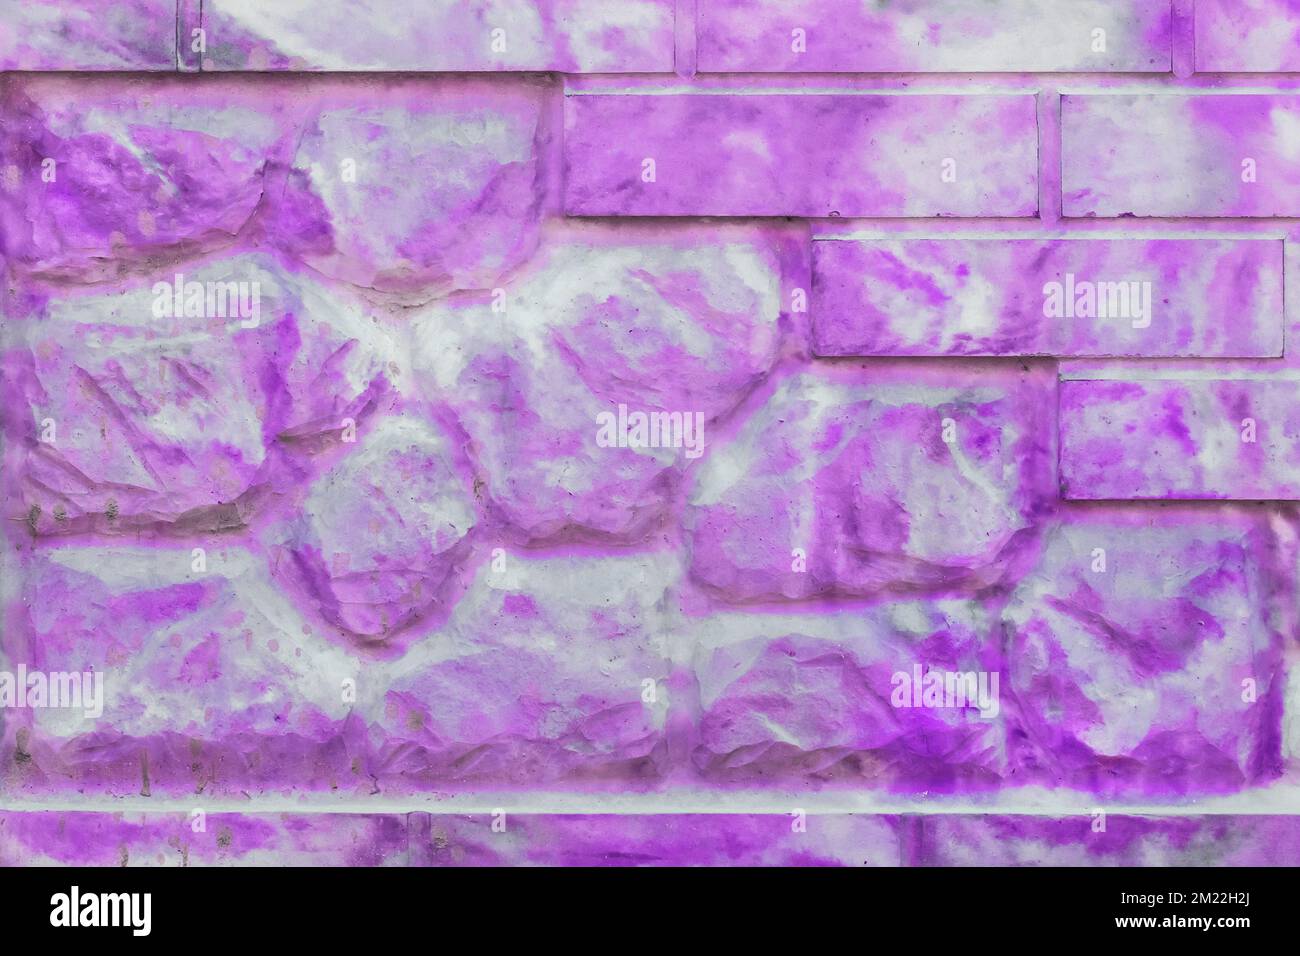 Decorative brick stone fence abstract purple pink spotted paint pattern modern interior wall texture background. Stock Photo